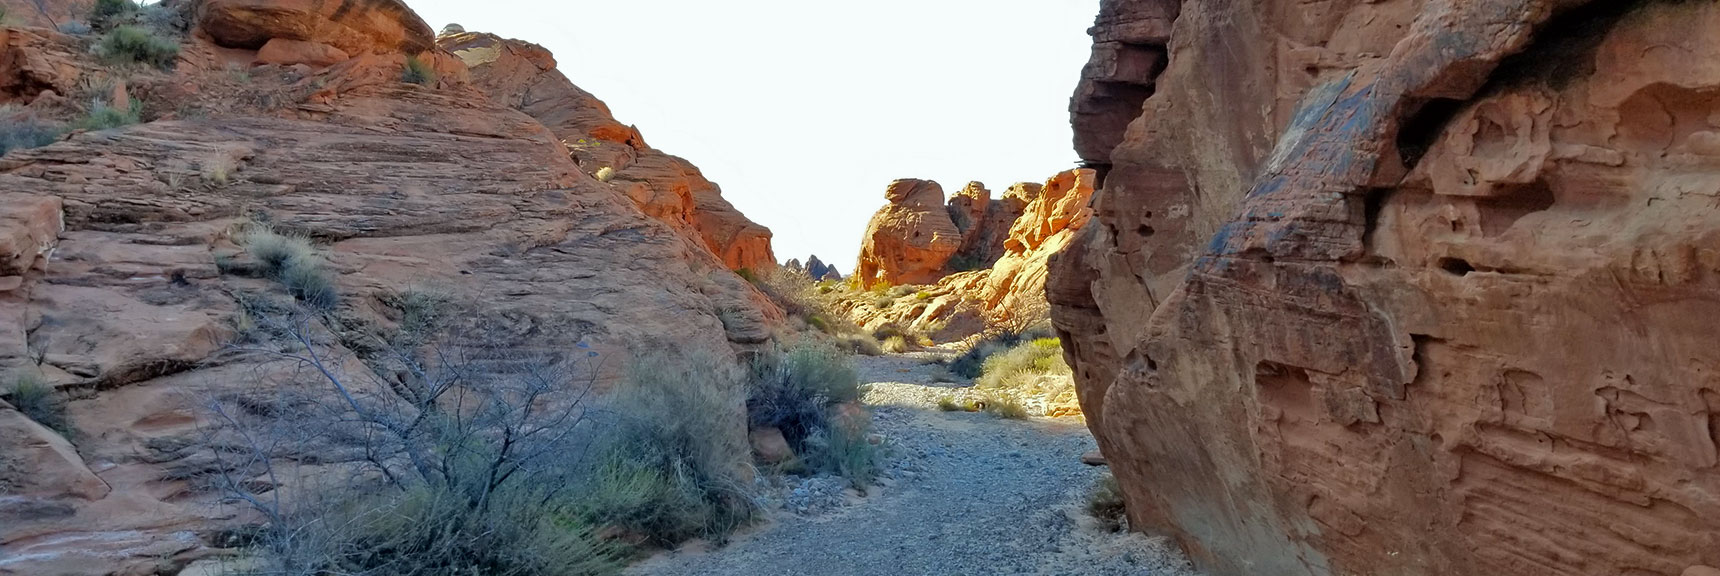 Descending Through the Northern Canyon Wash Toward White Domes on Prospect Trail in Valley of Fire State Park, Nevada